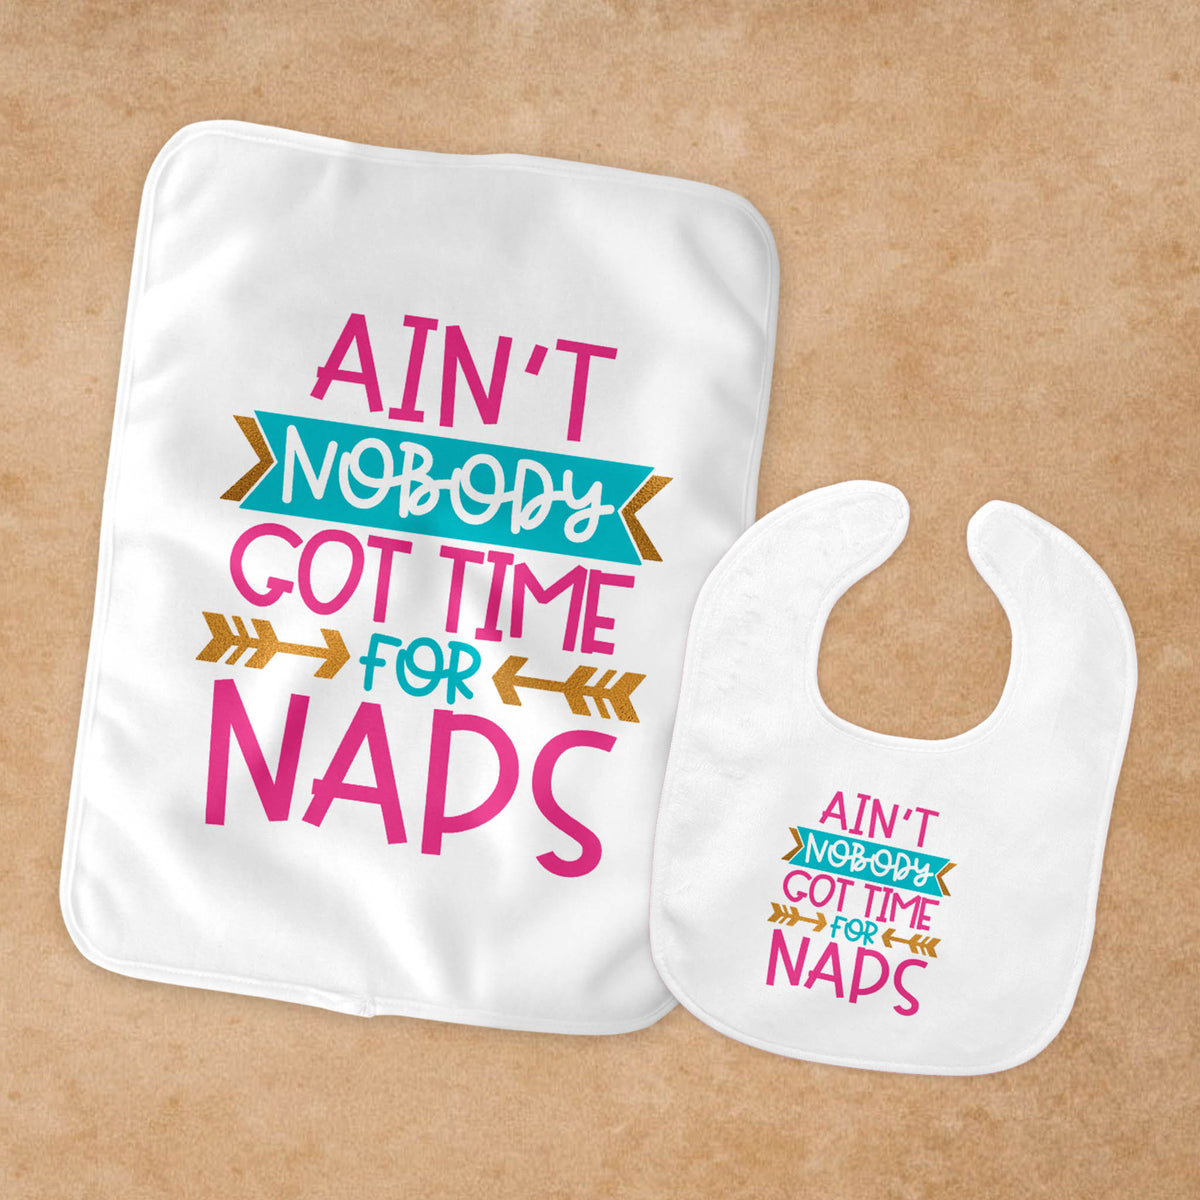 Personalized Burp Cloth | Custom Baby Gifts | Baby Shower | No Naps